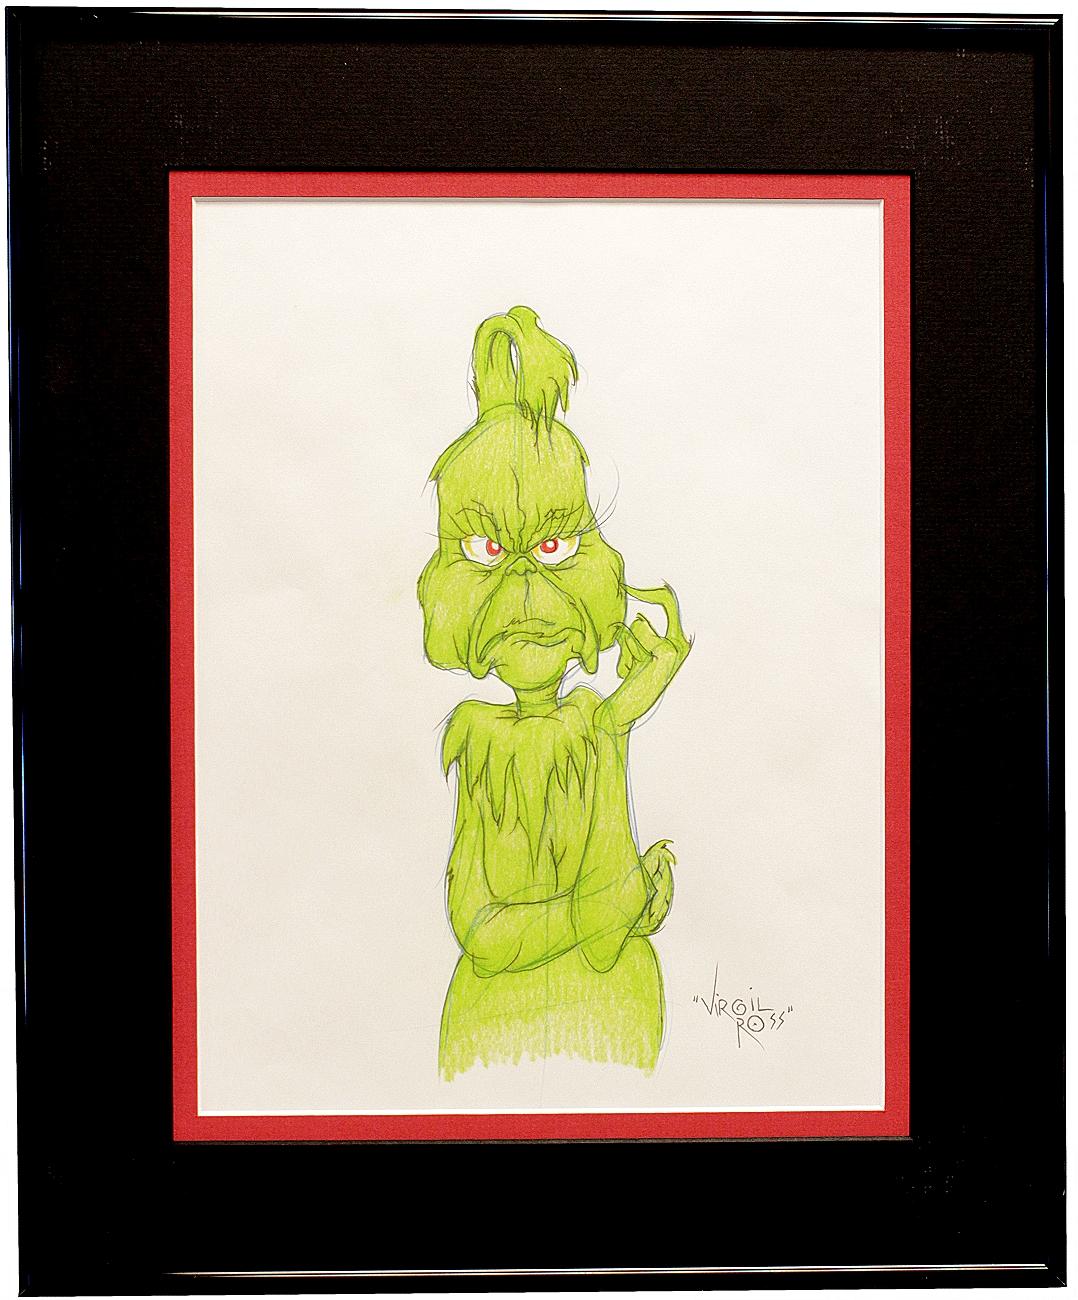 Author: GEISEL, Theodore: (Dr. Seuss) ( Virgil Ross ). 

Title: How The Grinch Stole Christmas. (Original drawing)

Publisher: Warner Brothers Studios, (c.1990's)

Description: Original Drawing of the Grinch. 3-1/2